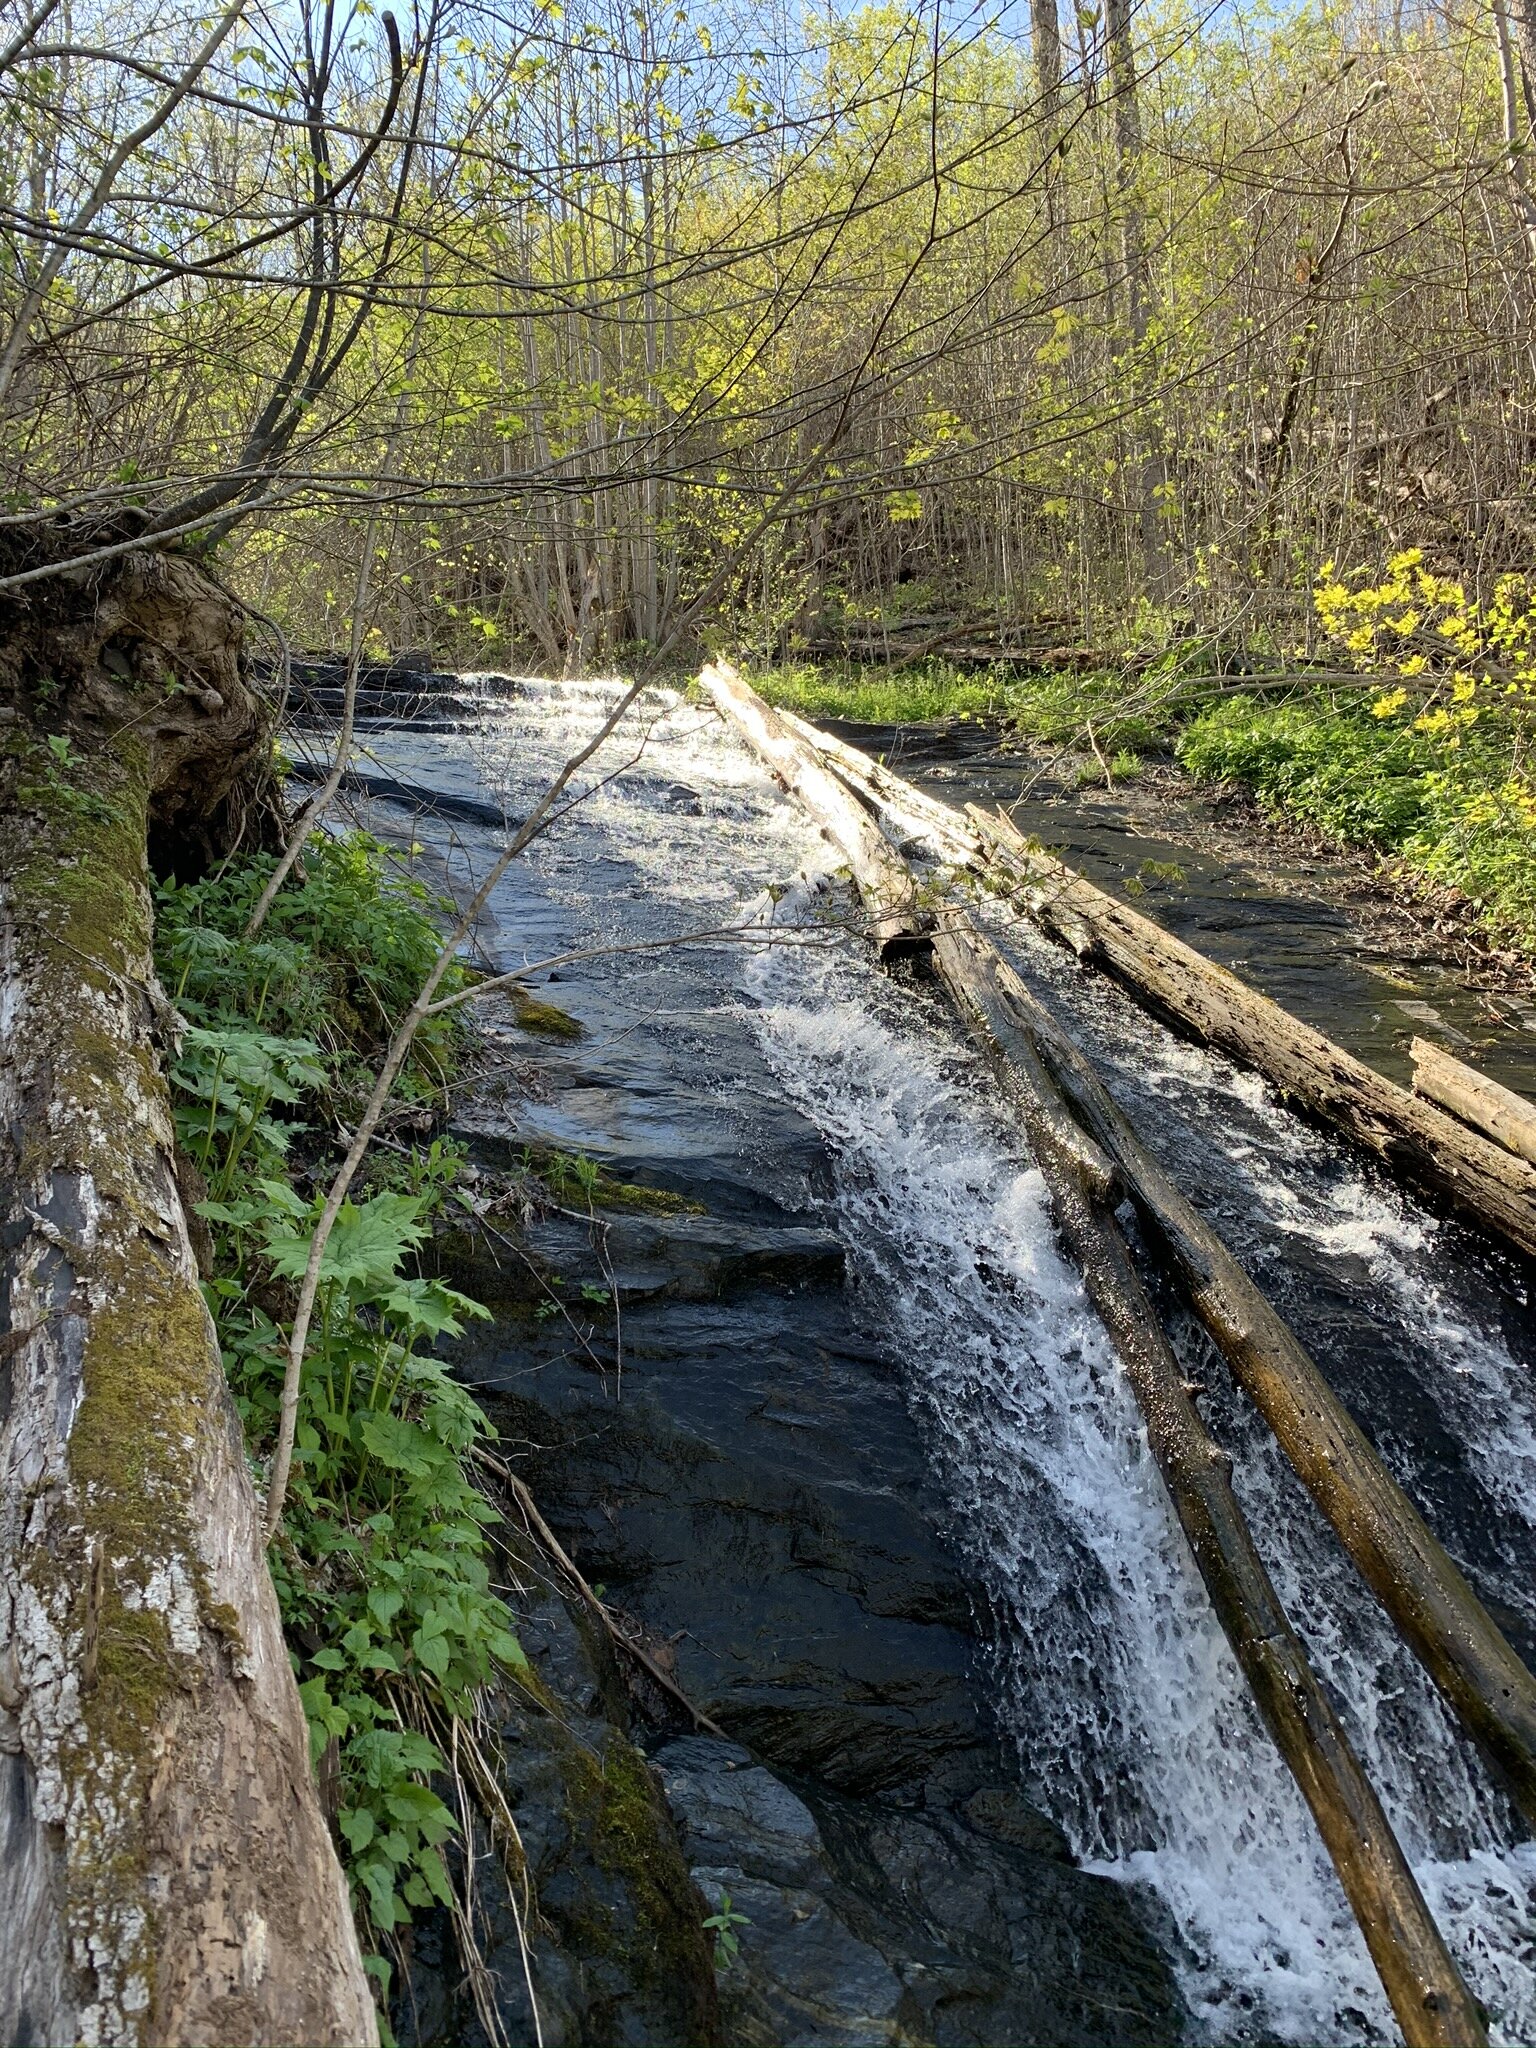 Hike to nearby waterfalls